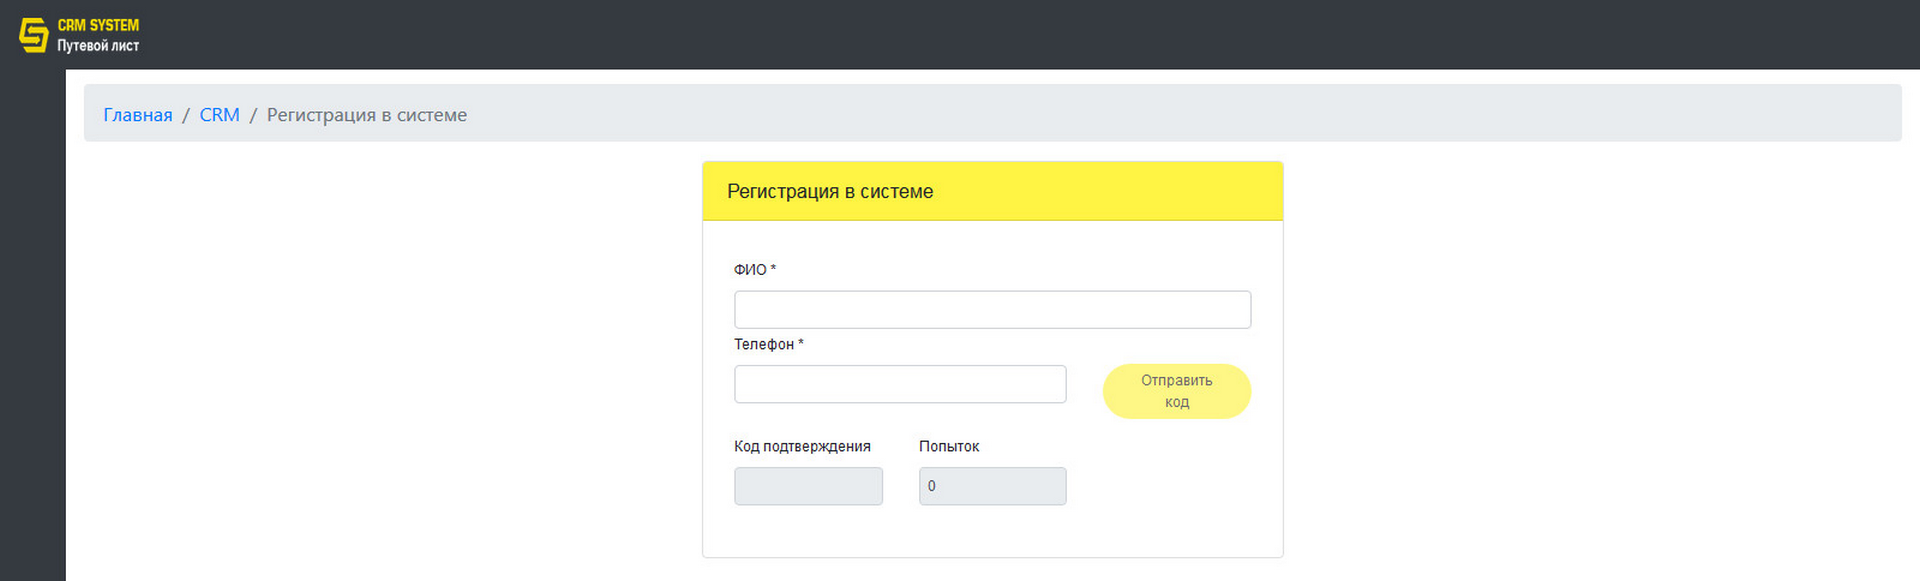 Resident Taxi registration in CRM system